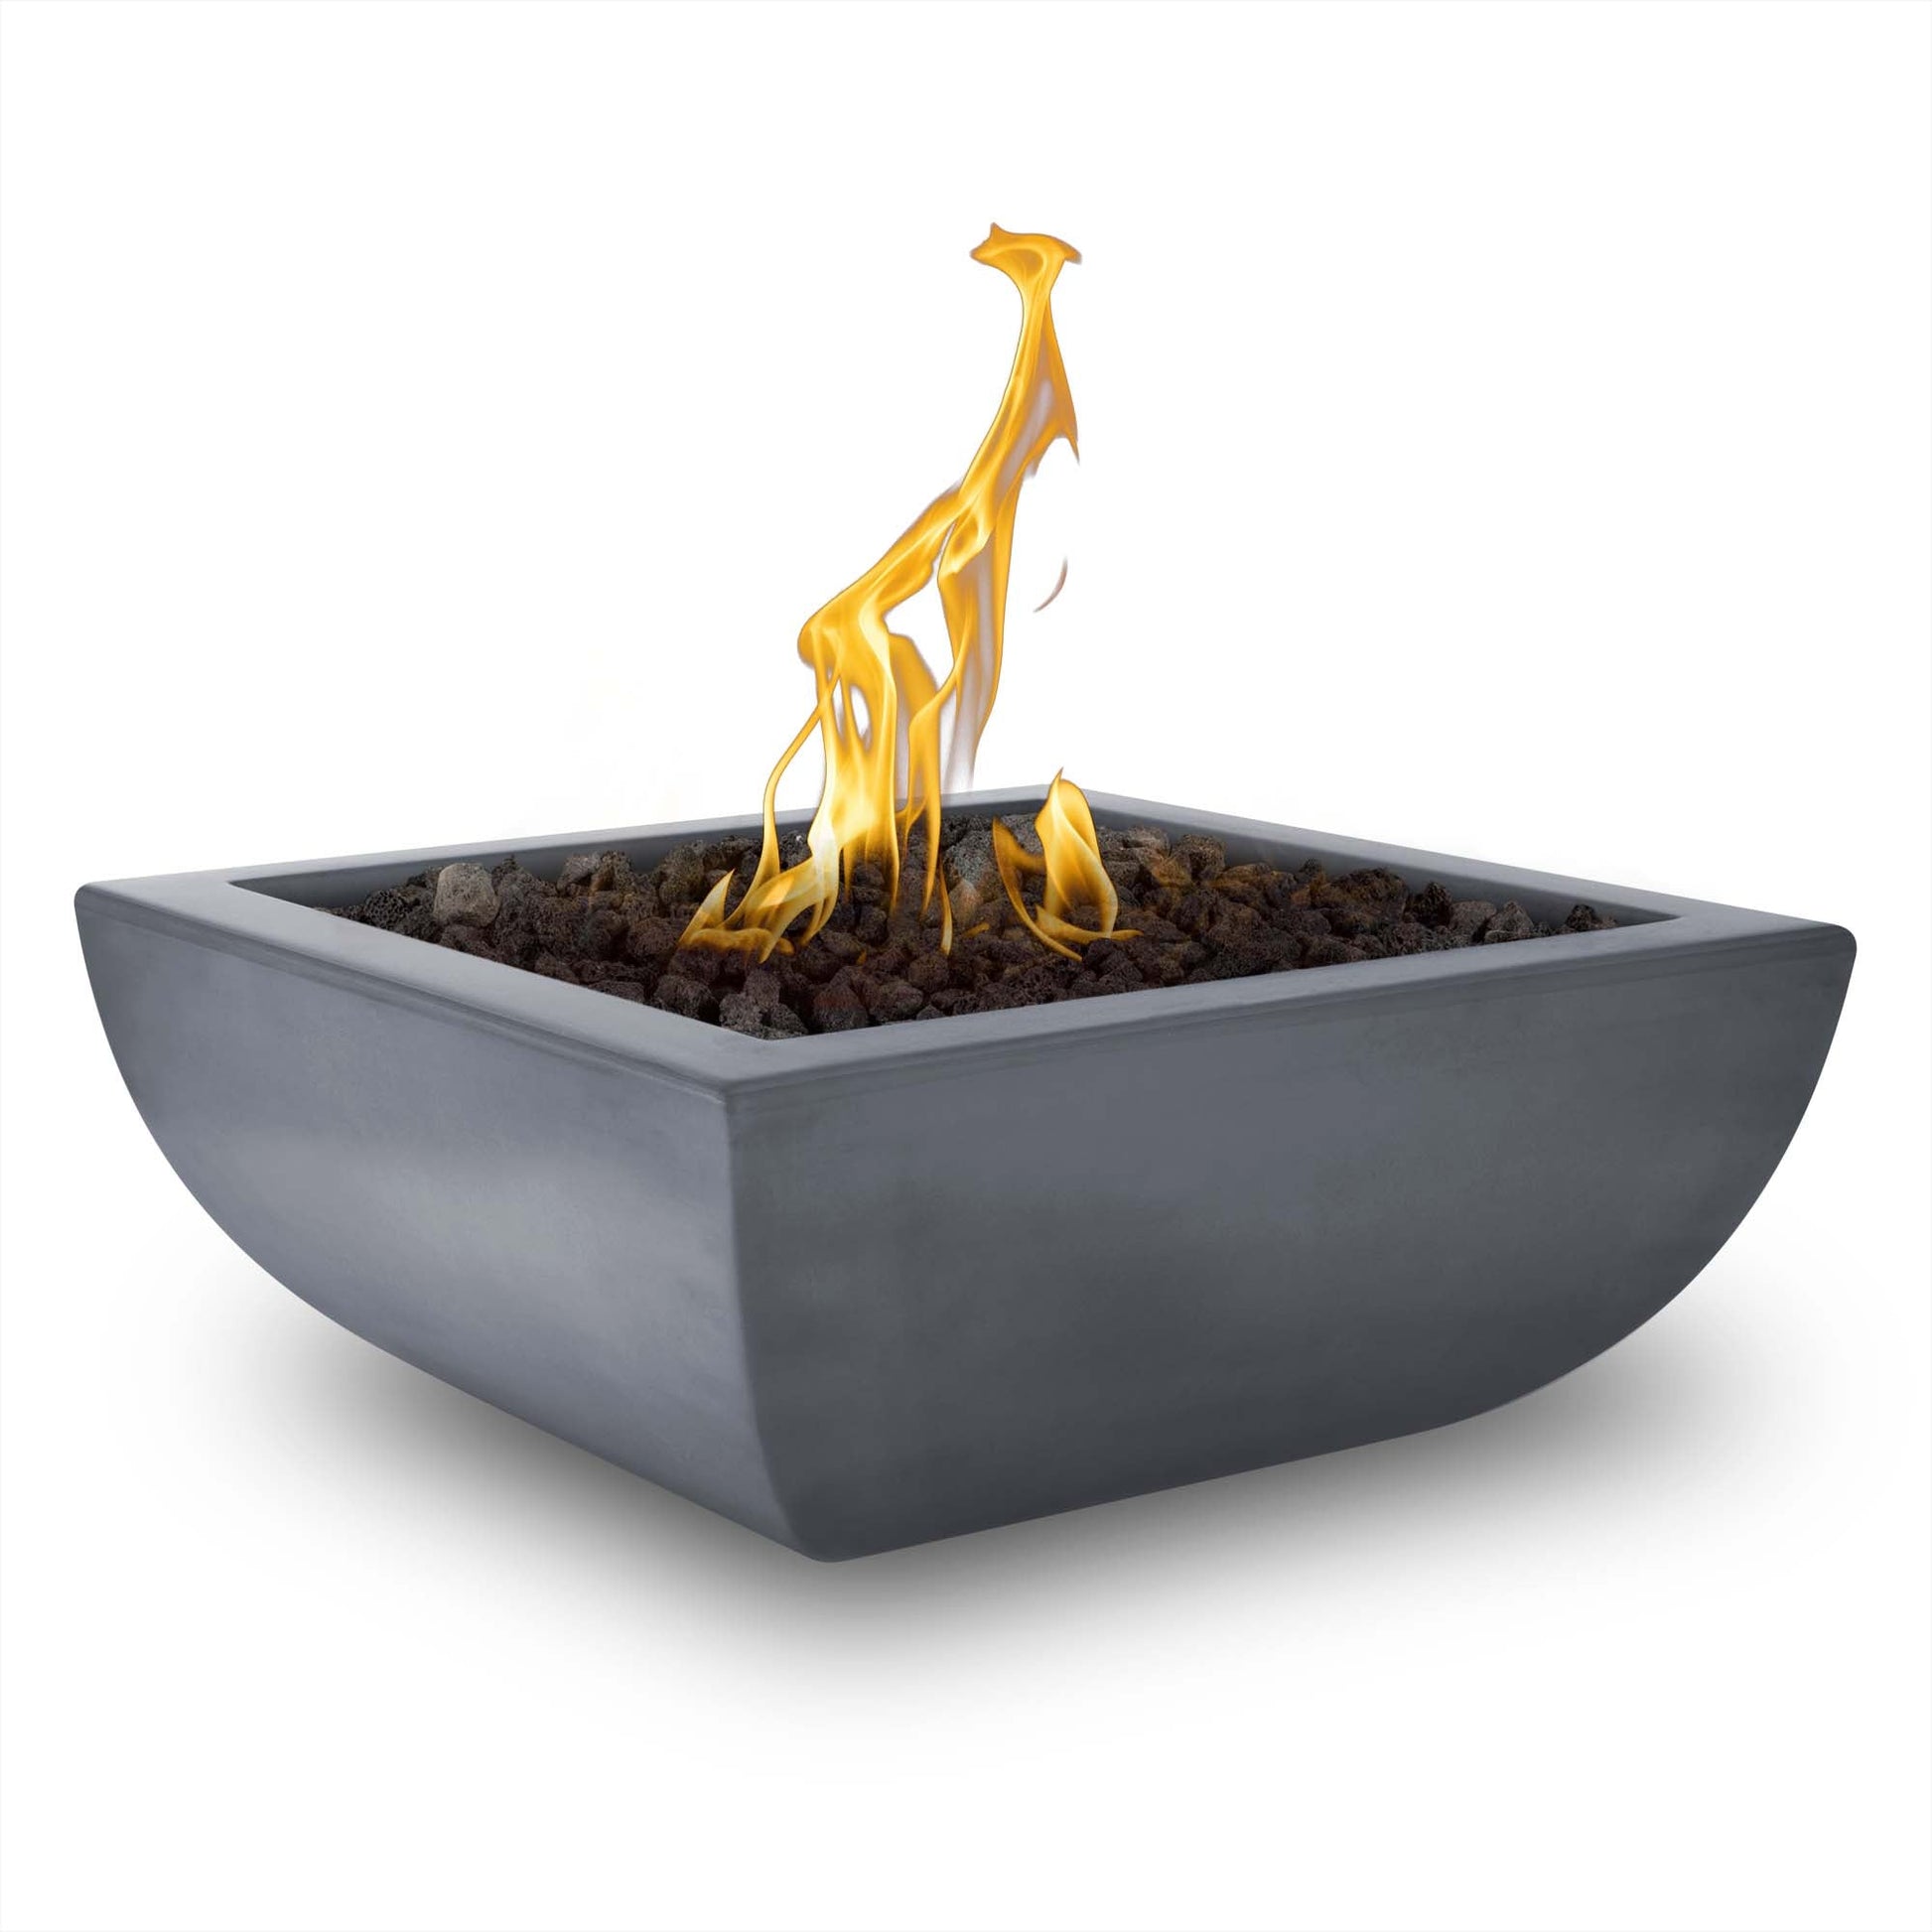 The Outdoor Plus Square Avalon 36" Chocolate GFRC Concrete Liquid Propane Fire Bowl with Match Lit with Flame Sense Ignition